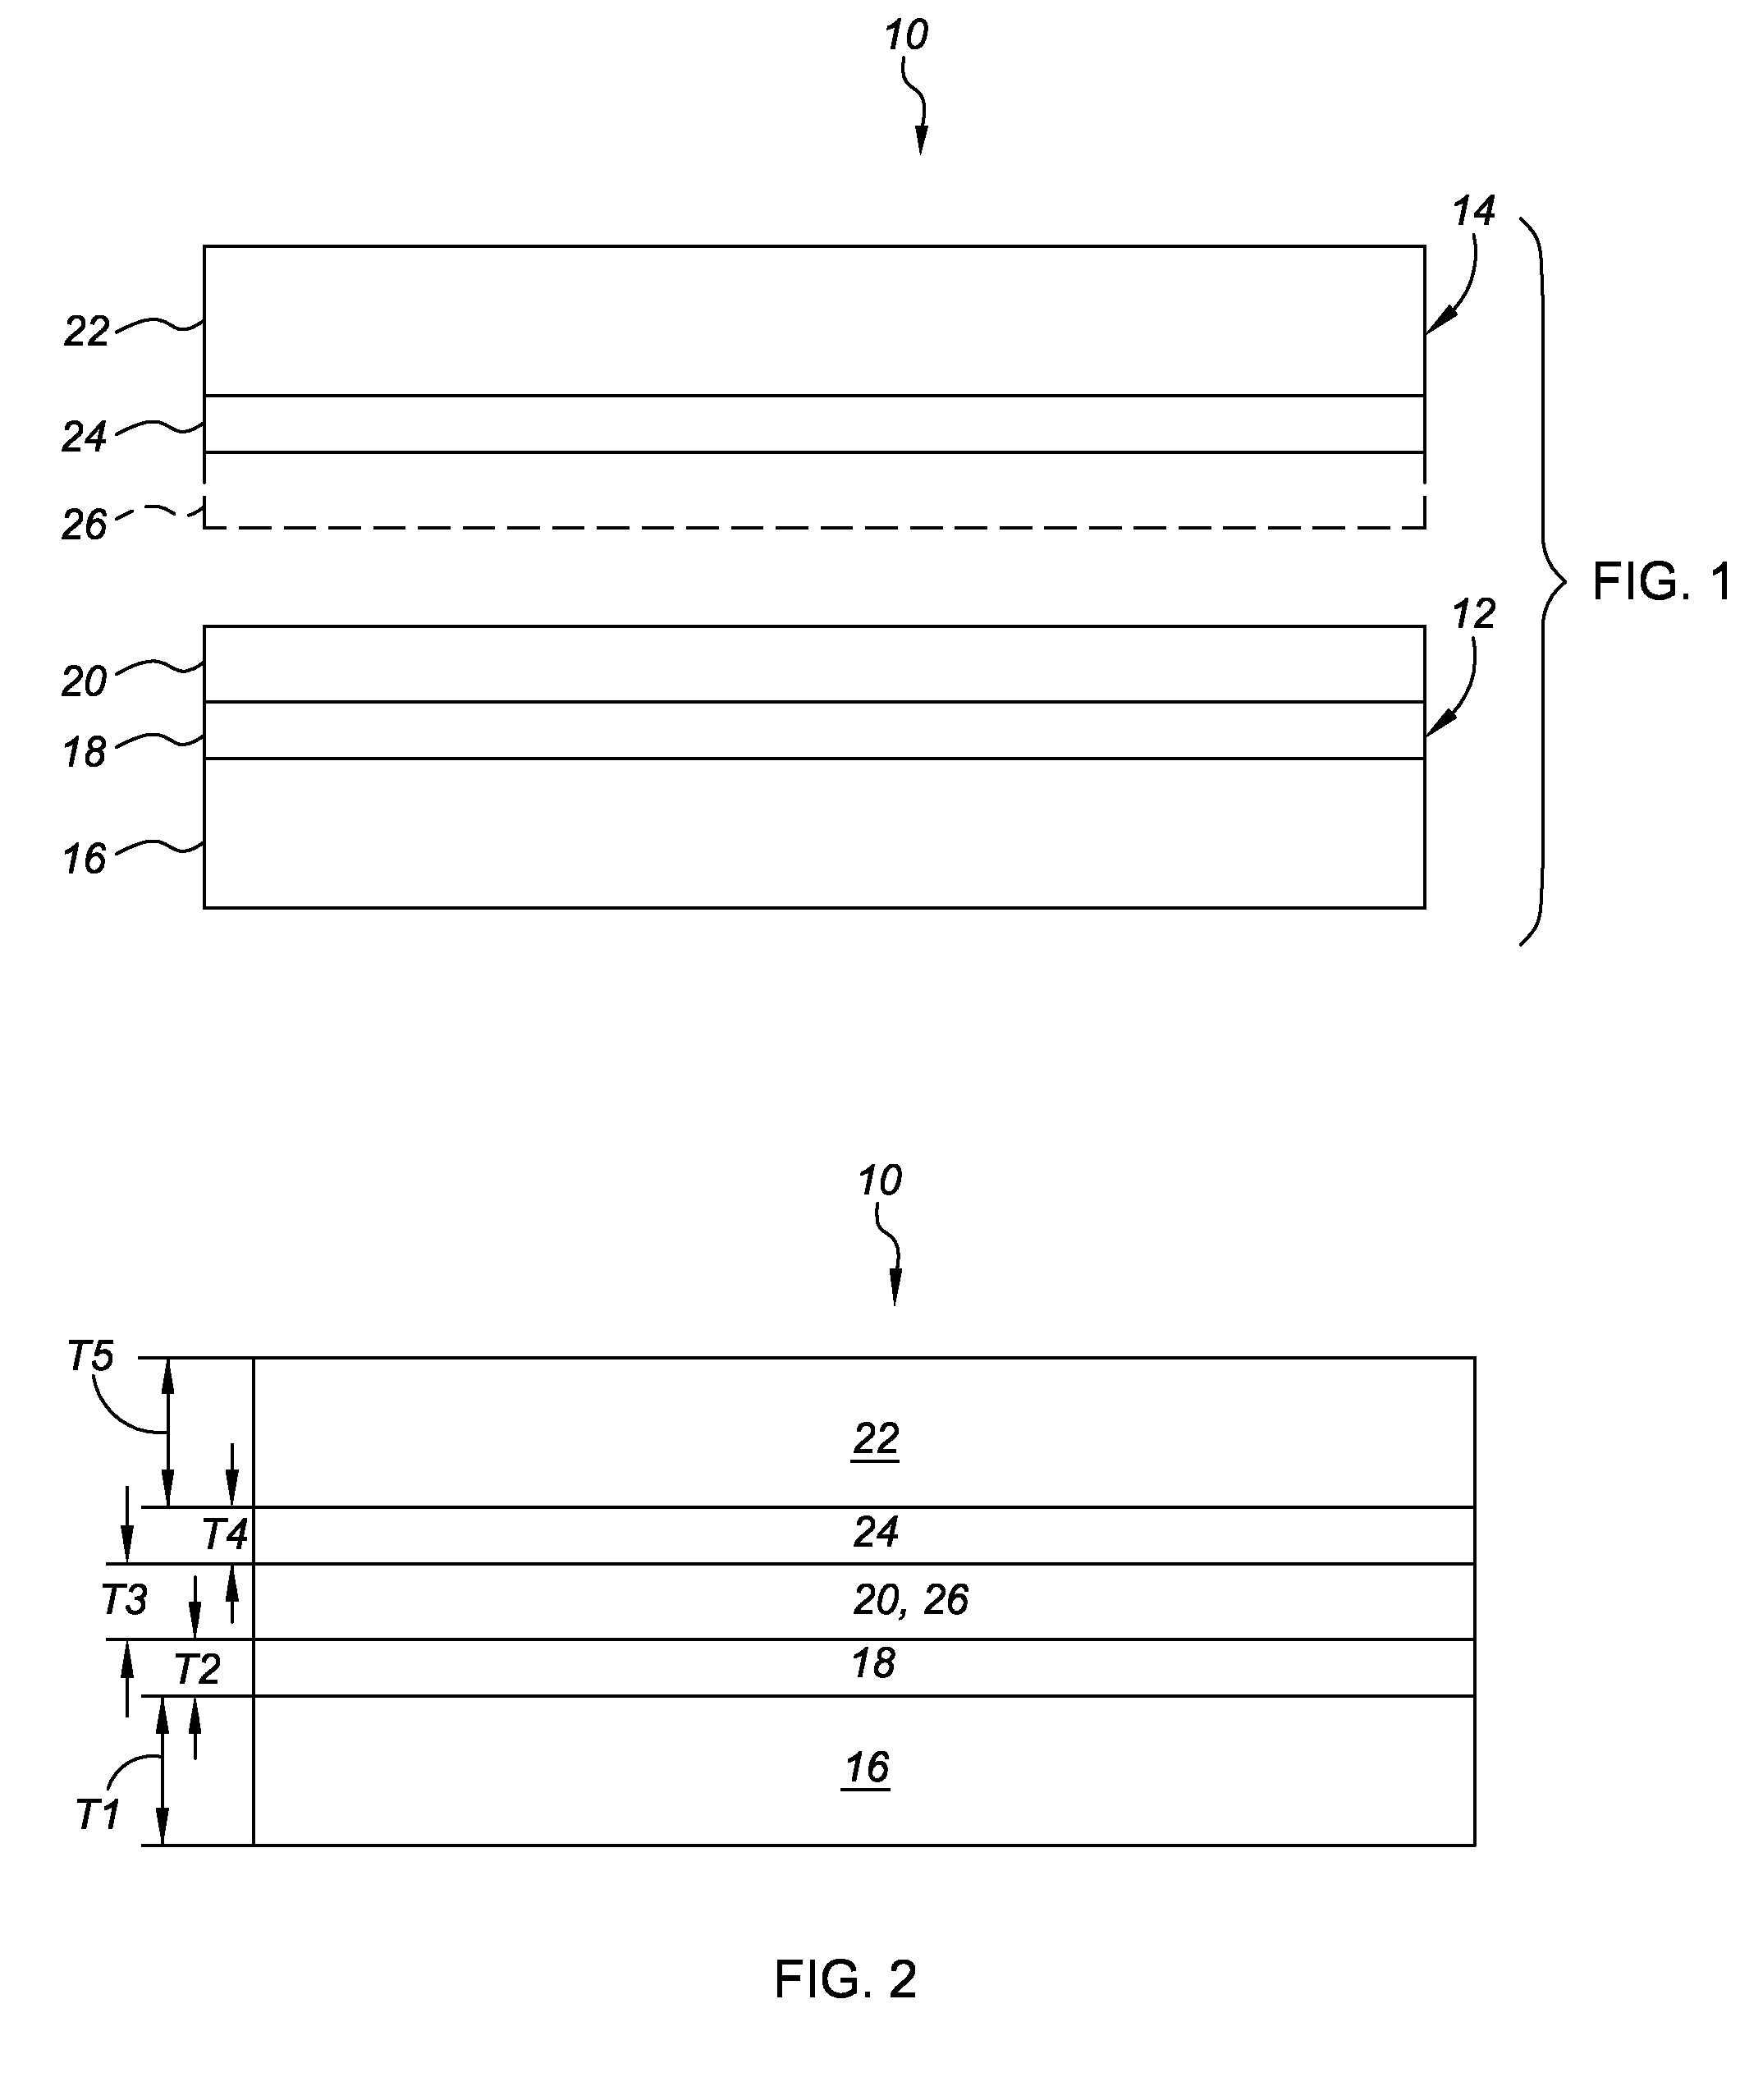 Method of manufacturing laminated damping structure with vulcanized rubber as viscoelastic core